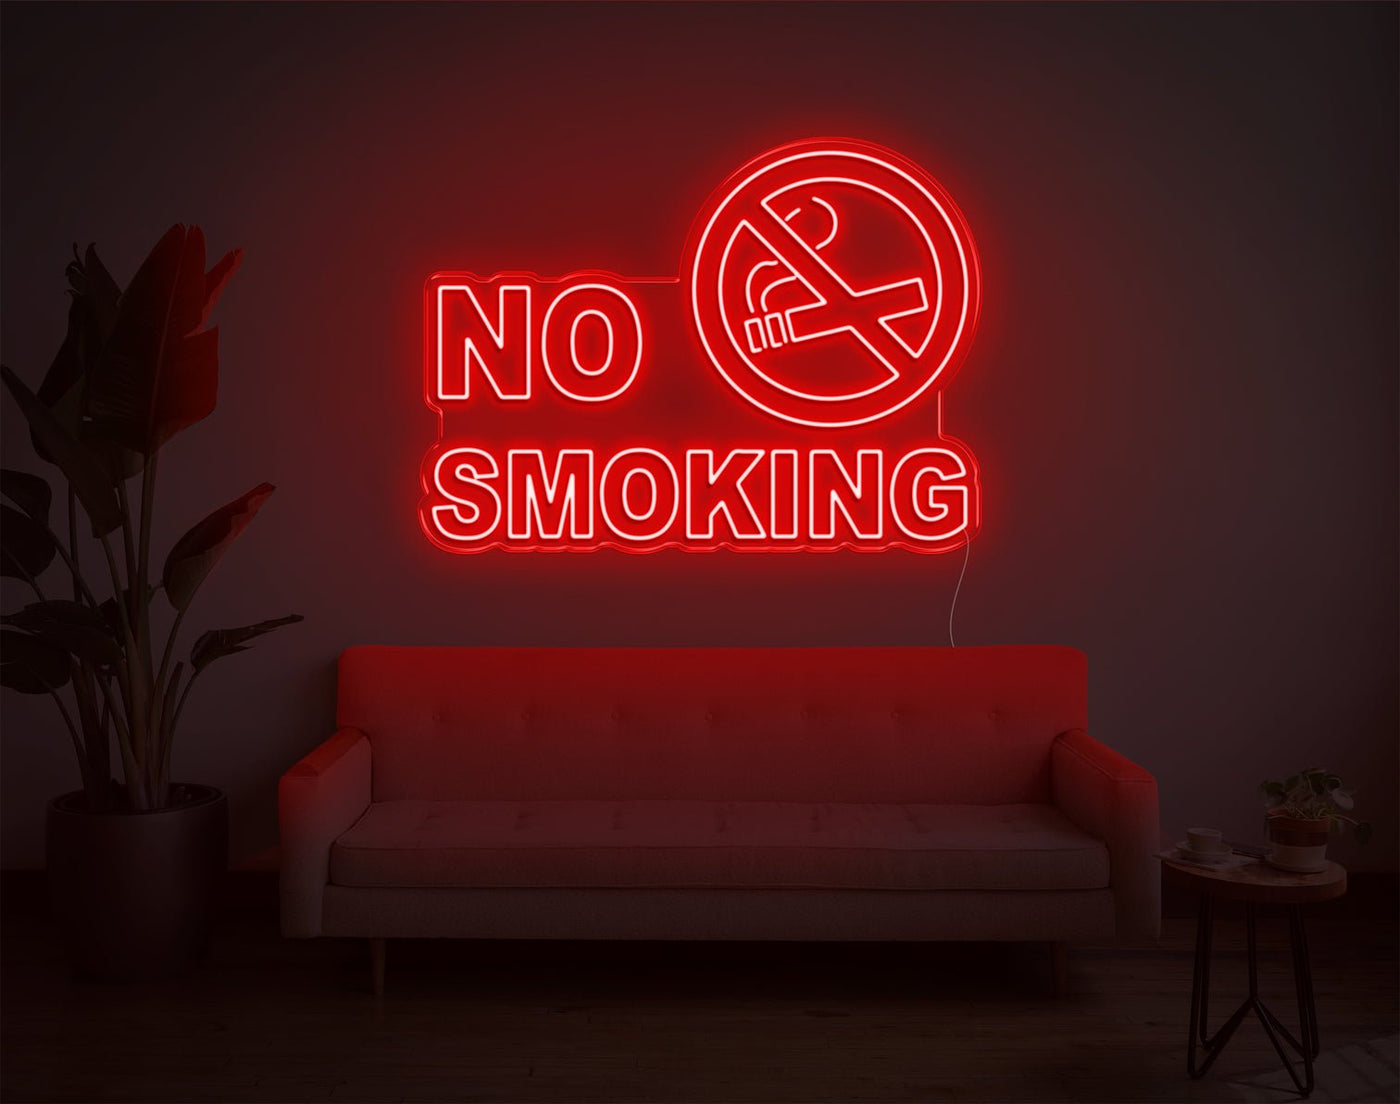 No Smoking LED Neon Sign - 26inch x 35inchRed